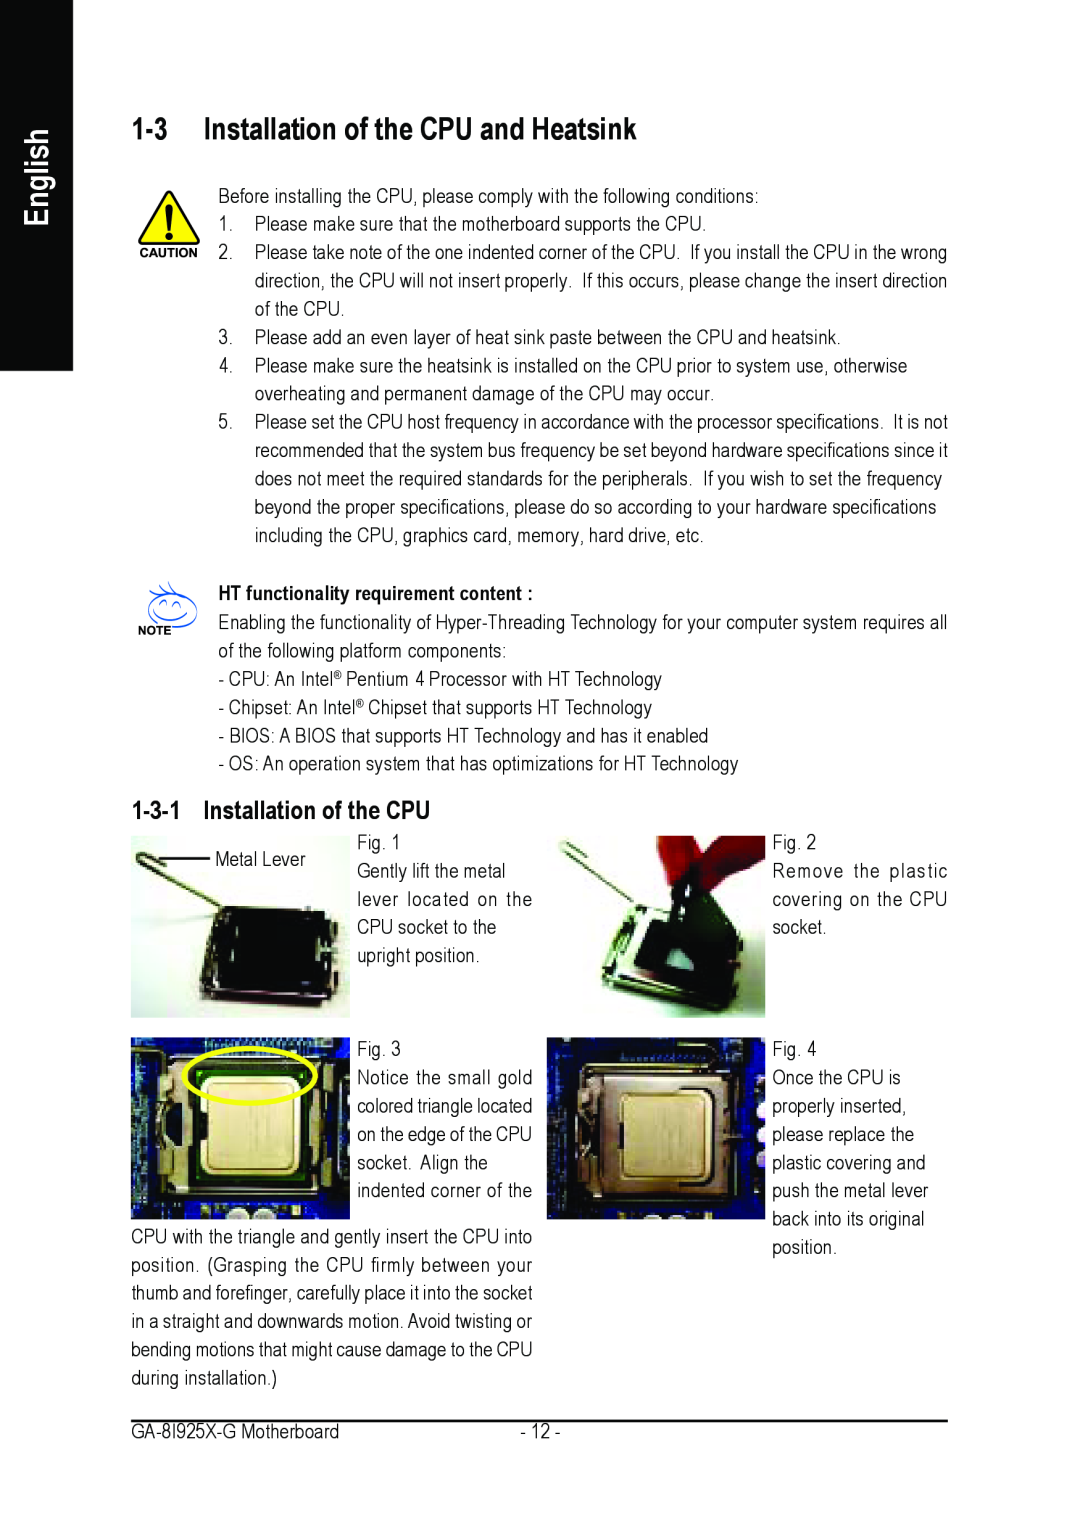 Gigabyte GA-8I925X-G user manual Installation of the CPU and Heatsink, English, HT functionality requirement content 